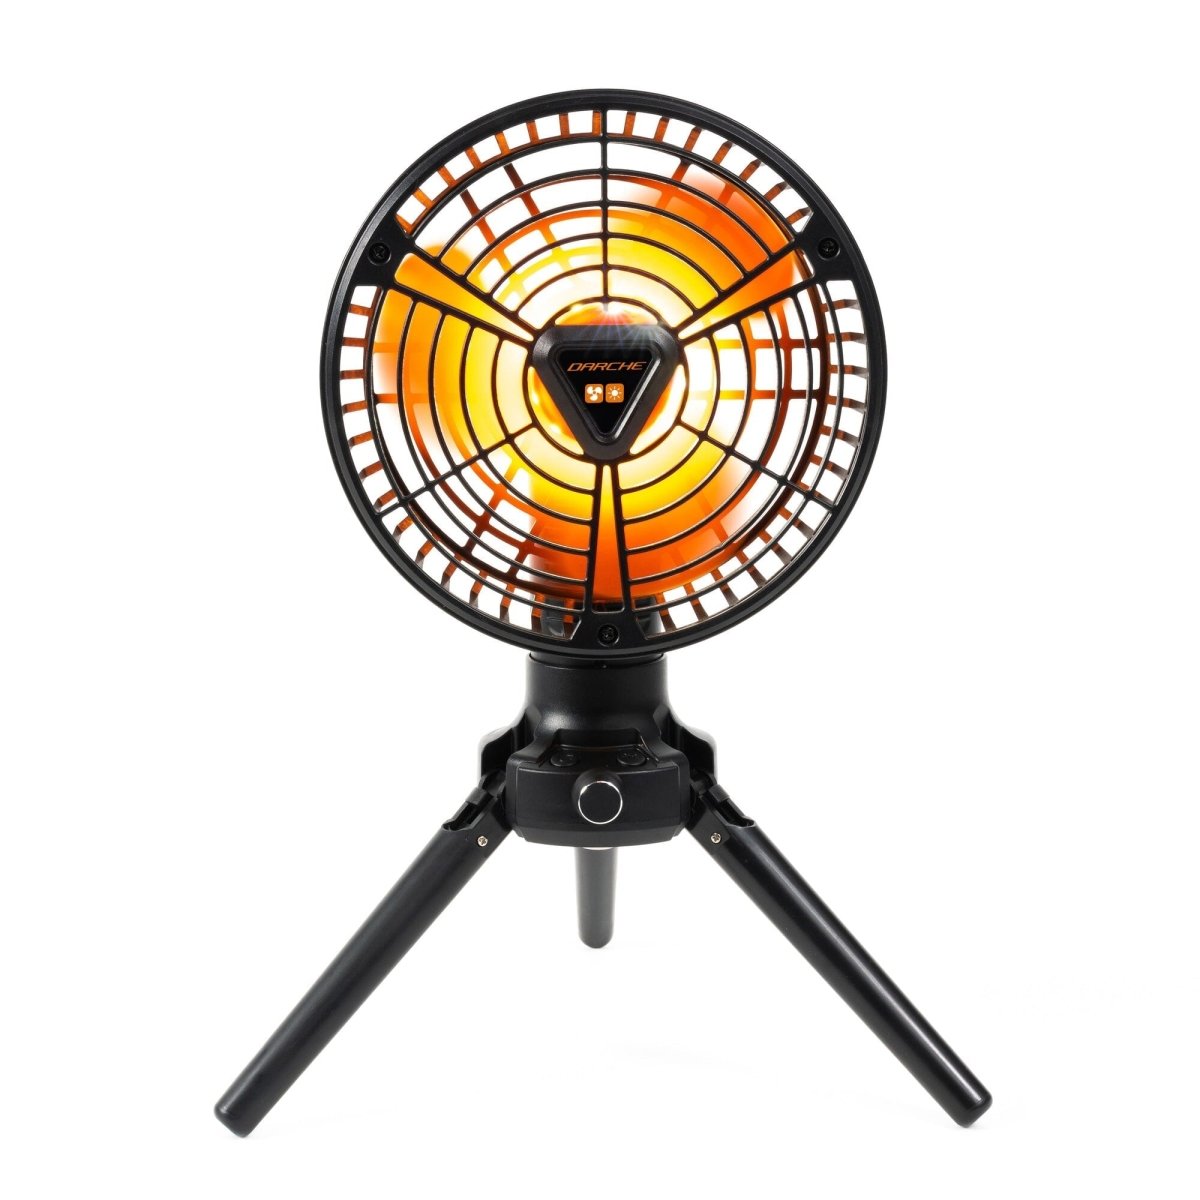 Darche 2 in 1 Fan And Light - NZ Offroader